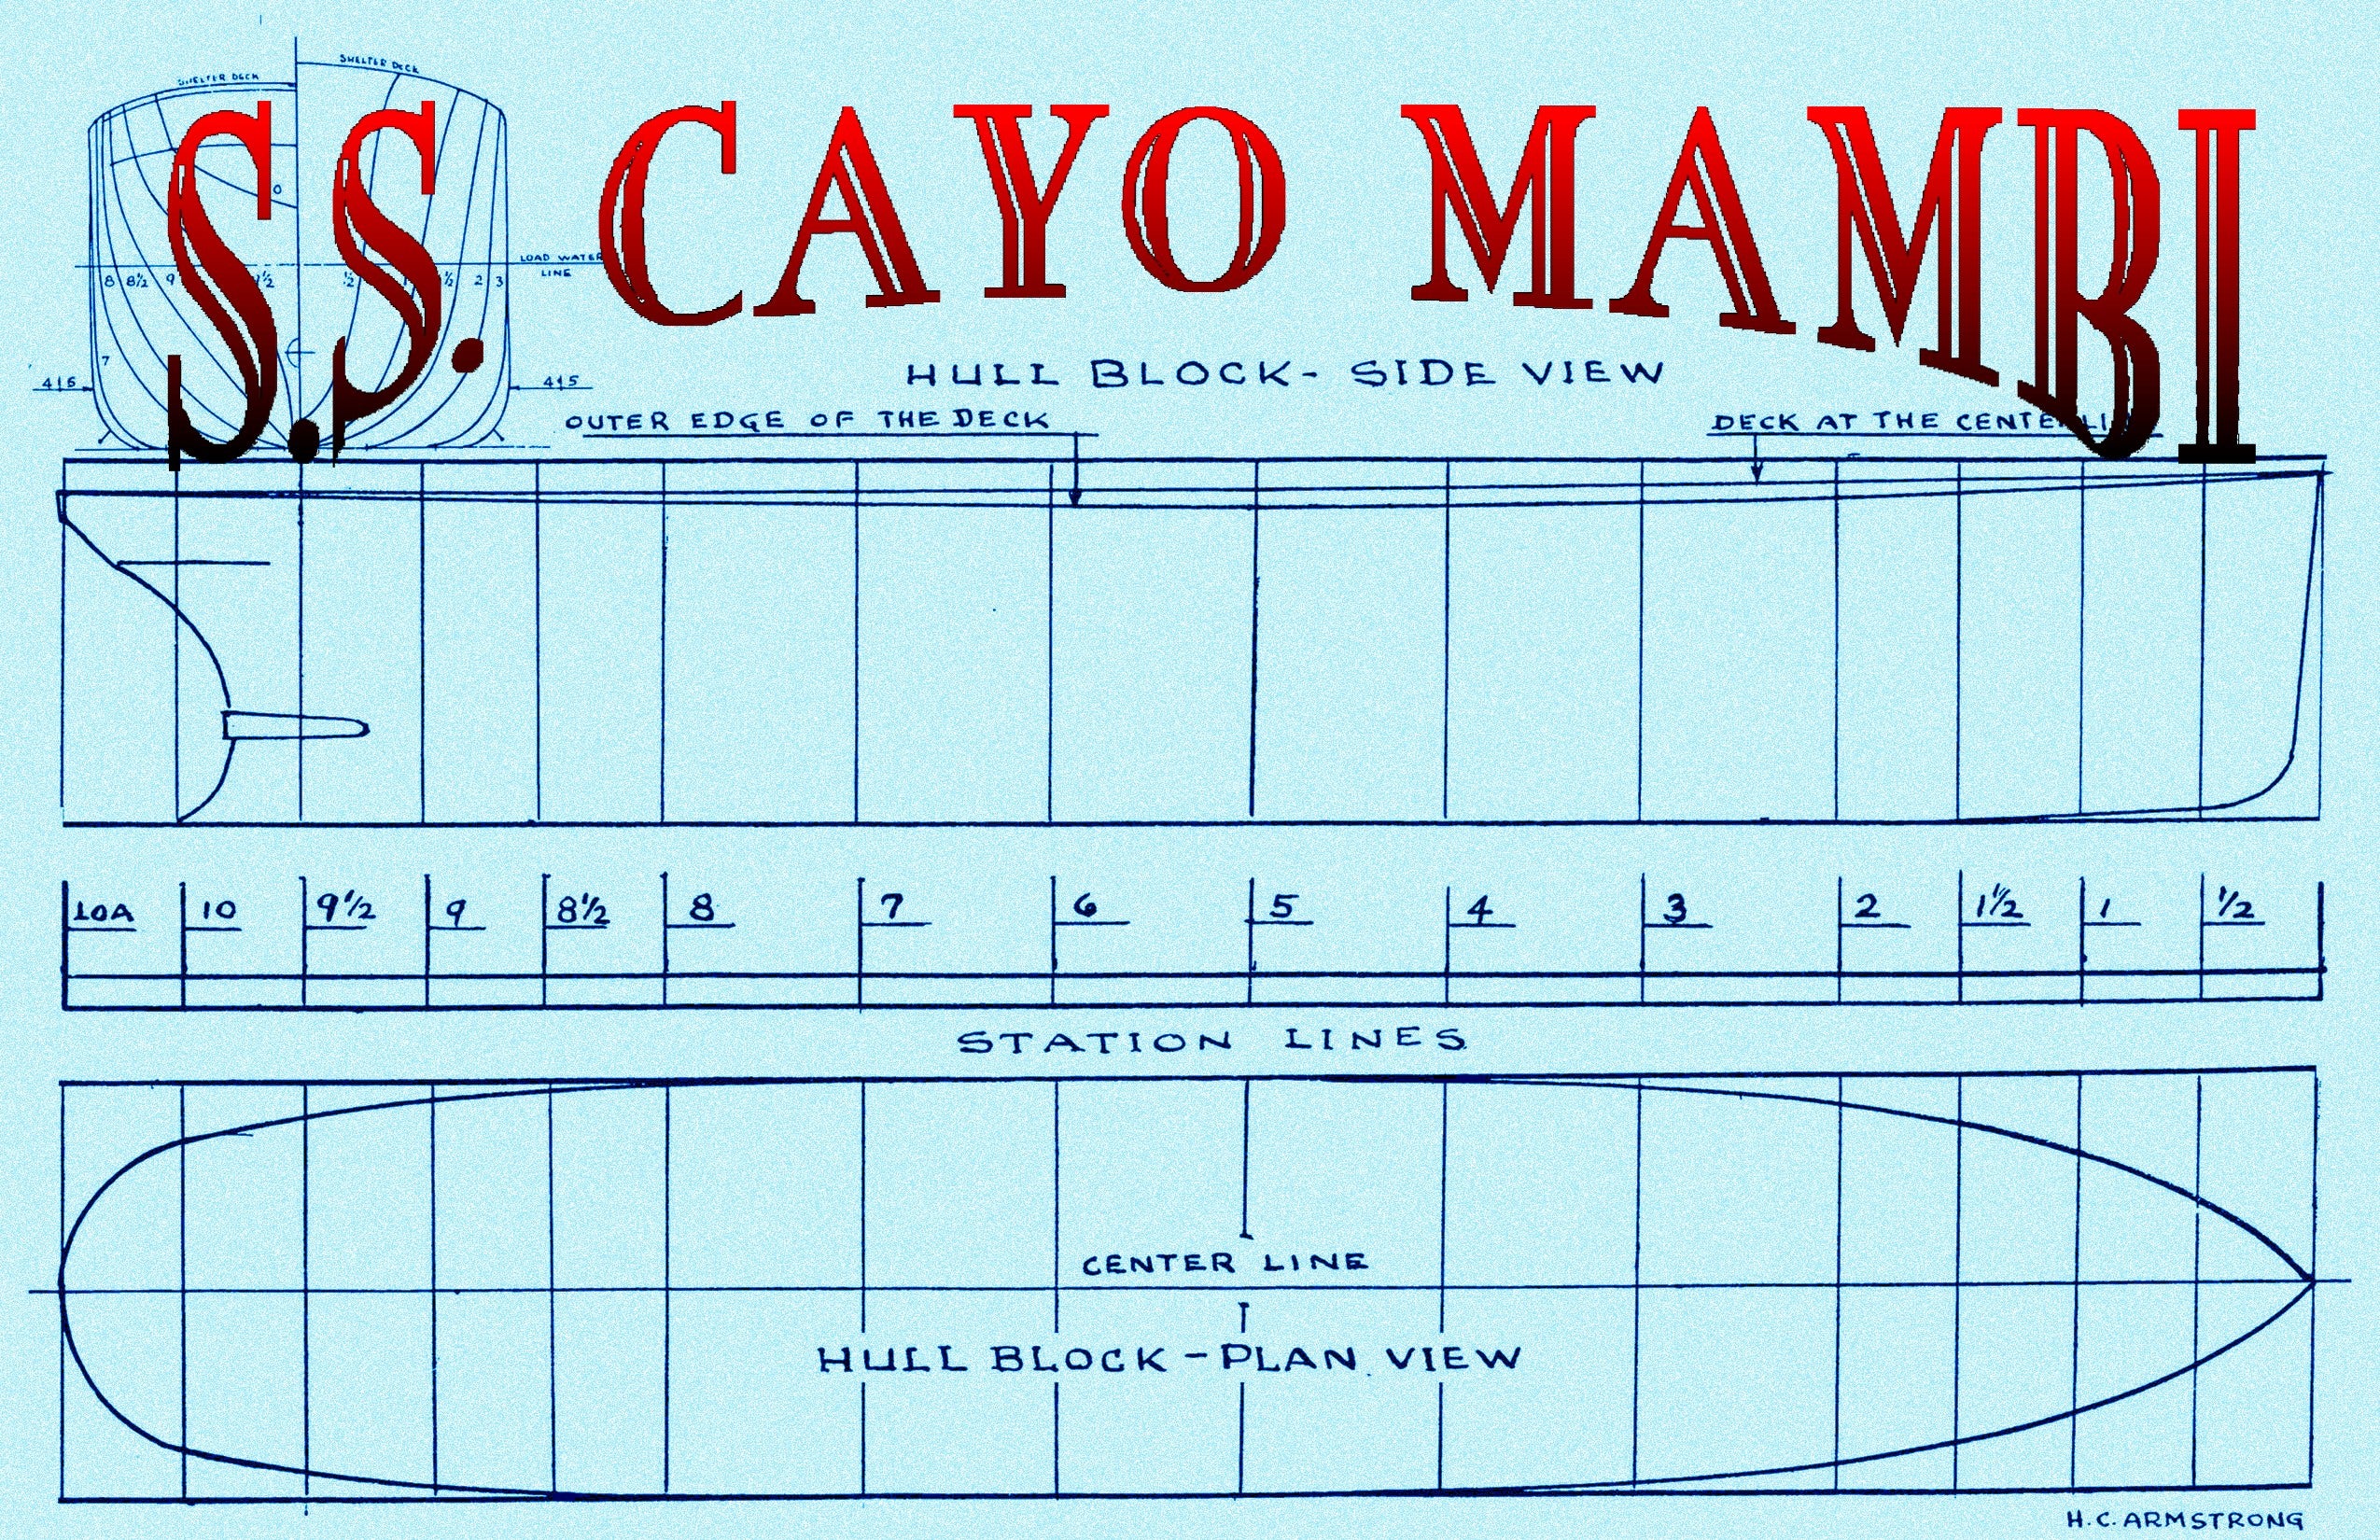 full size printed plan scale 1:96 & 1:192 s.s. cayo mambi suitable for radio control or display